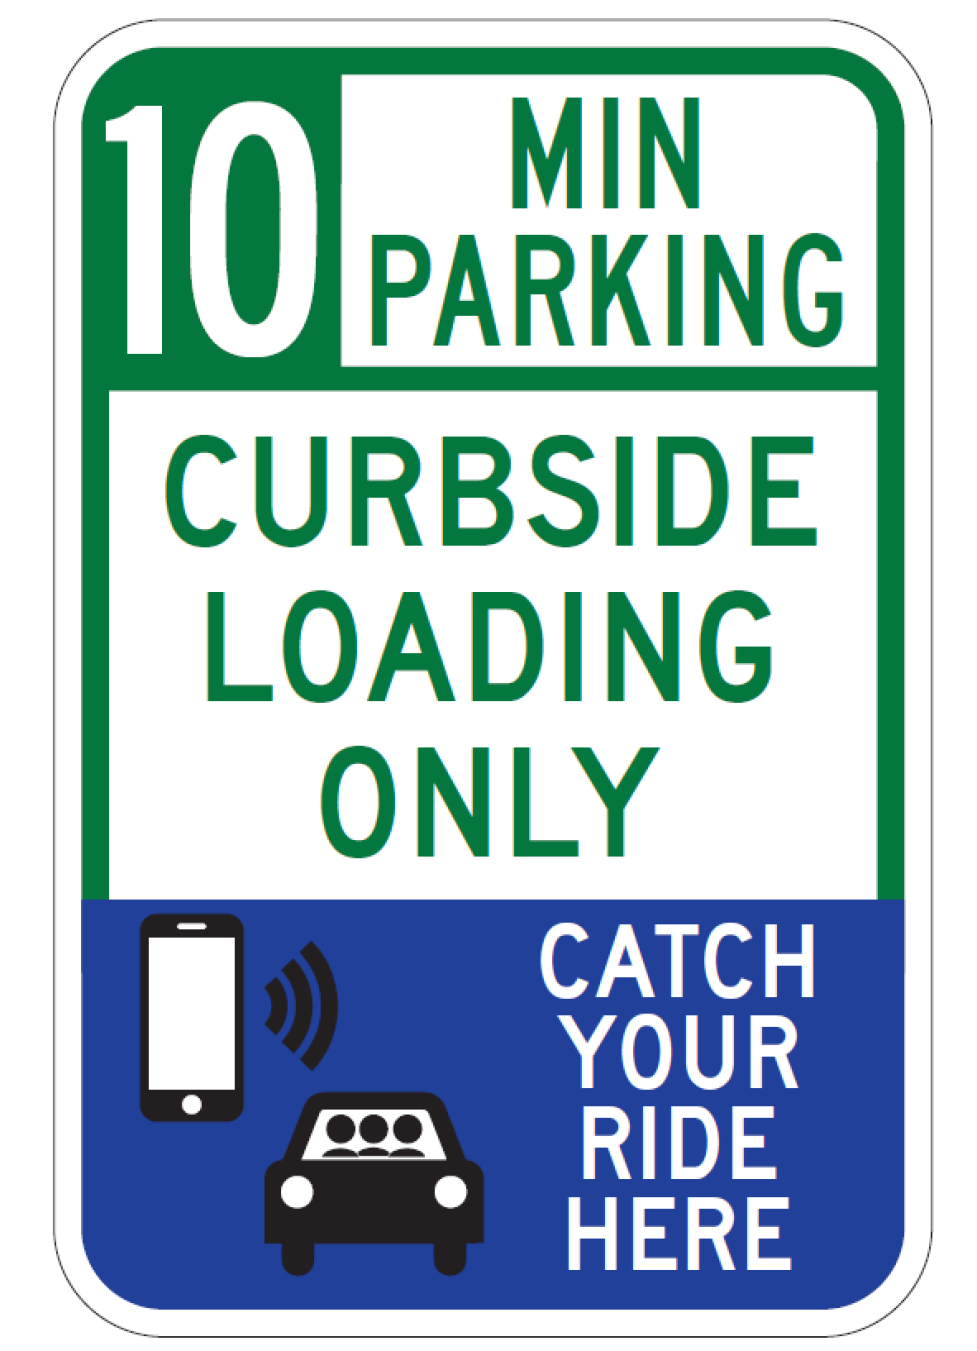 A street sign that says 10 min parking, curbside loading only, catch your ride here